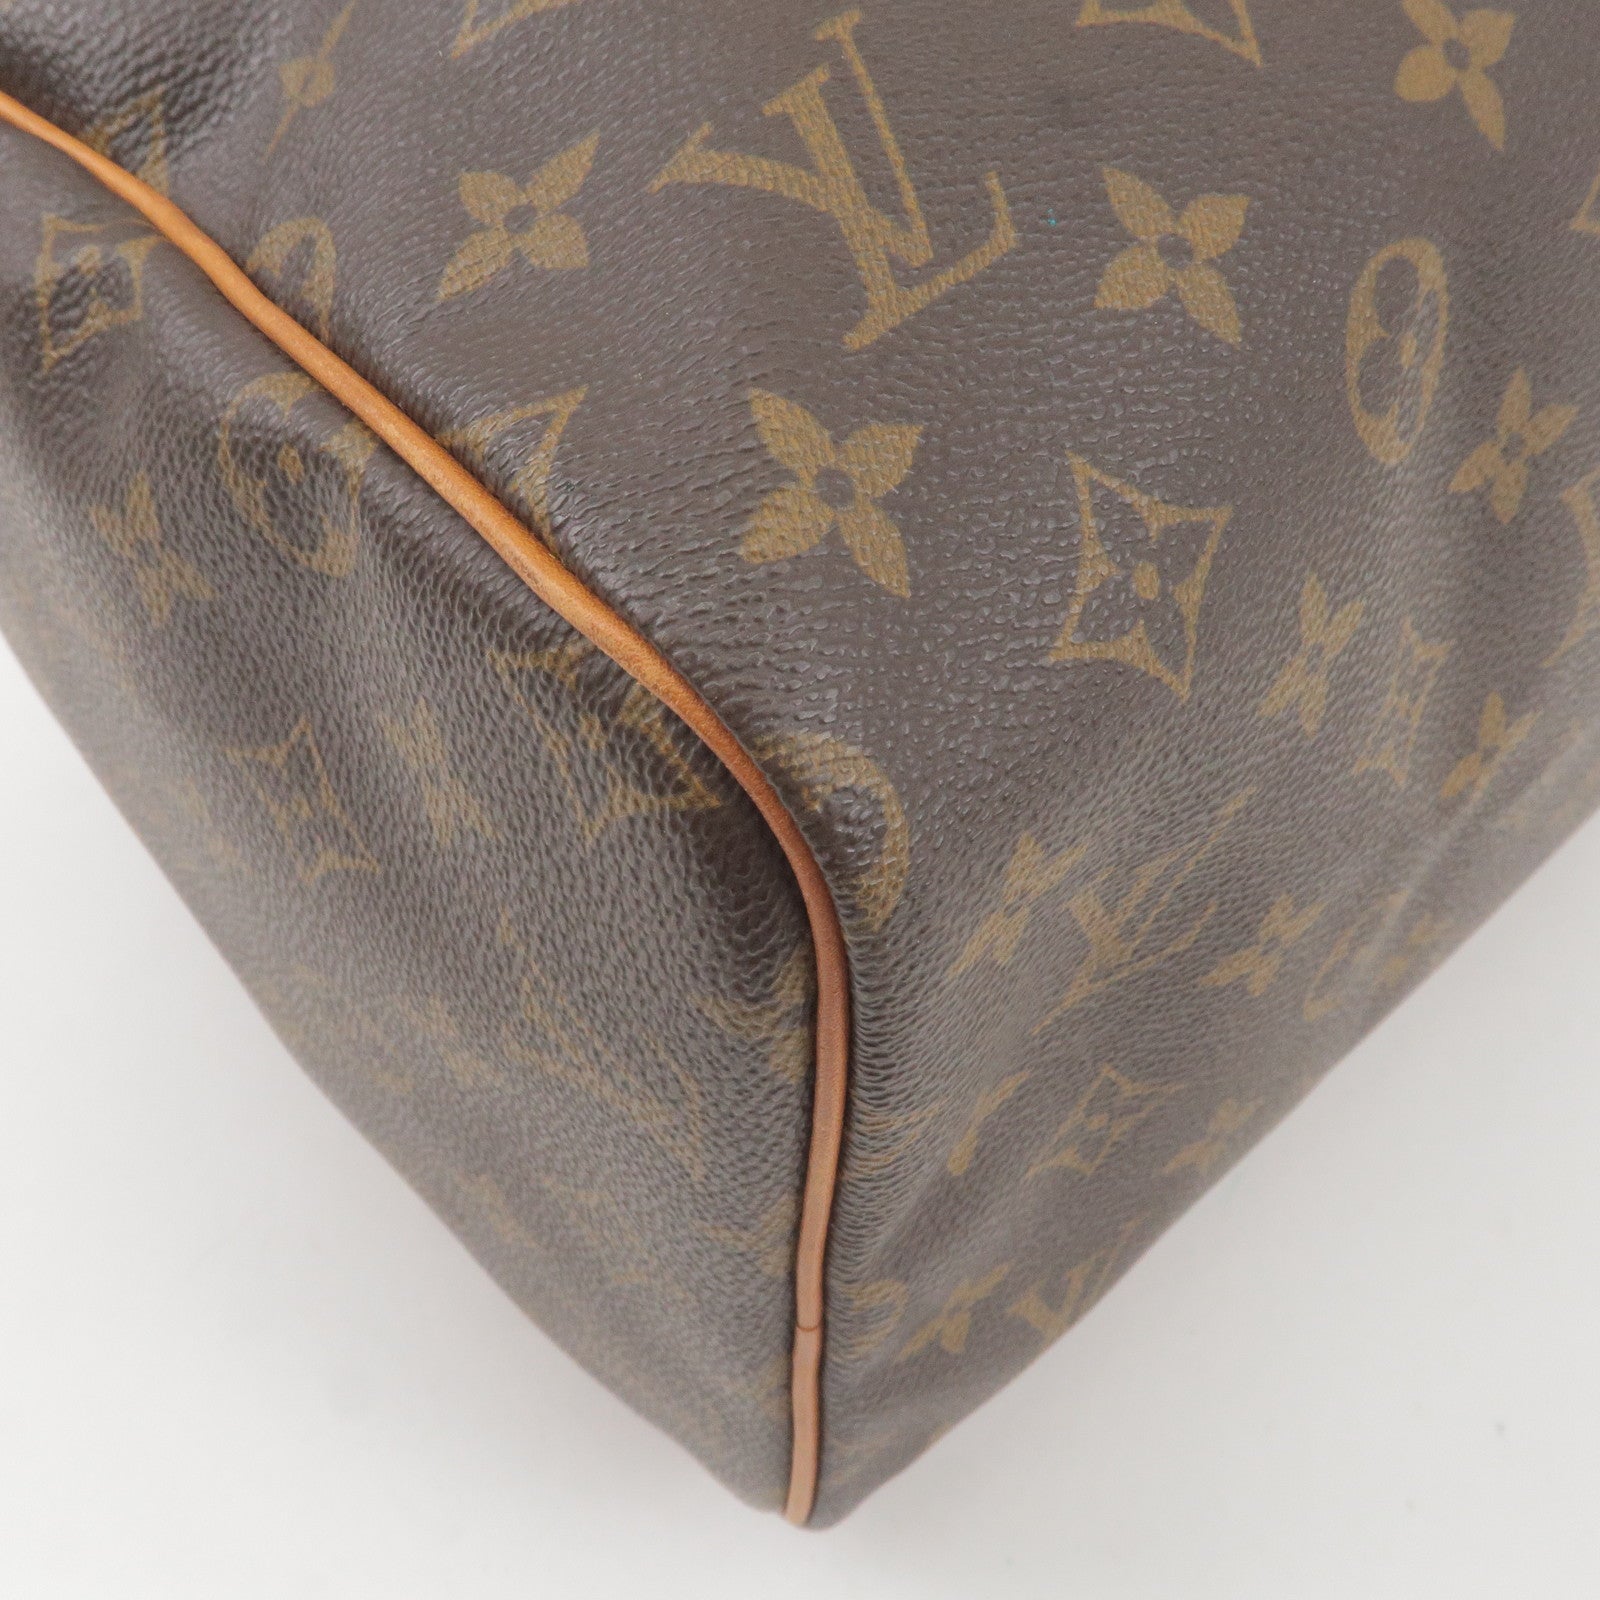 Louis Vuitton 2003 Pre-owned Abbesses Crossbody Bag